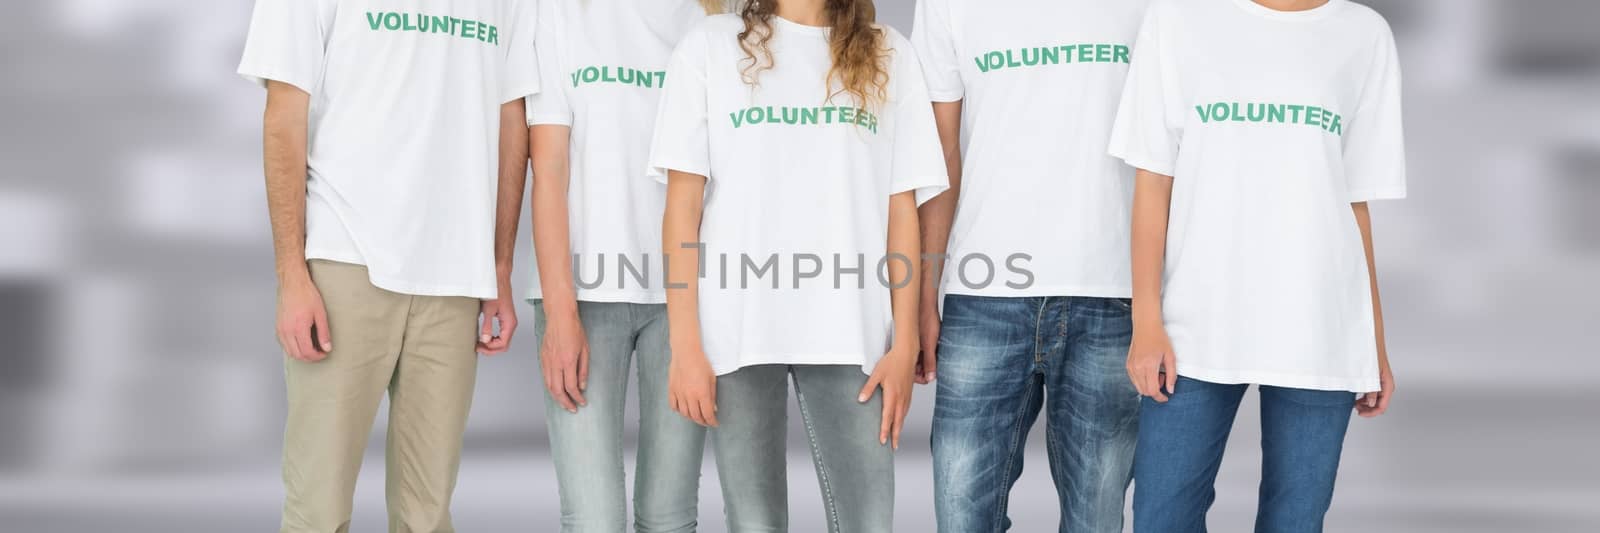 Digital composite of Group of Volunteer People standing together with blurred background